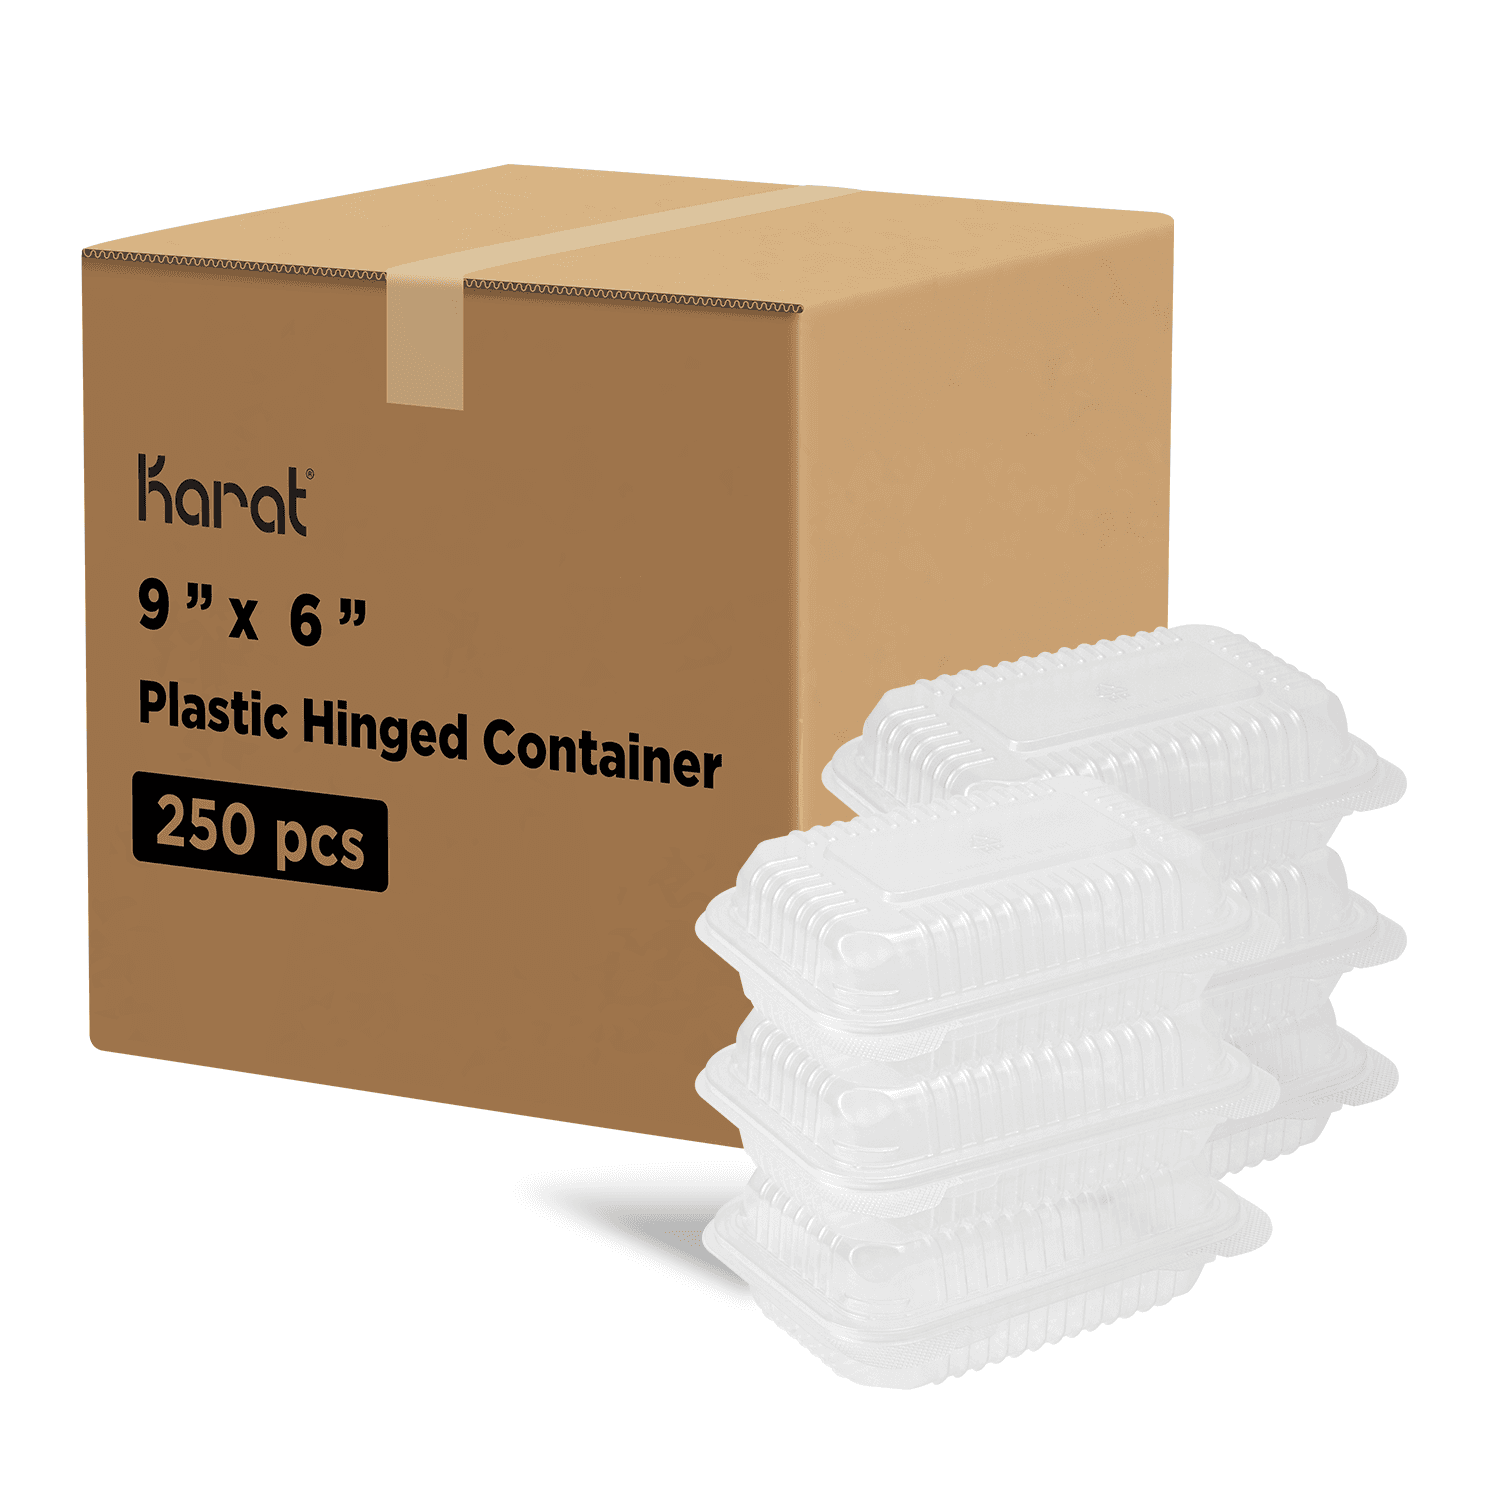 Clear Karat 9'' x 6" PP Plastic Hinged Container stacked next to packaging